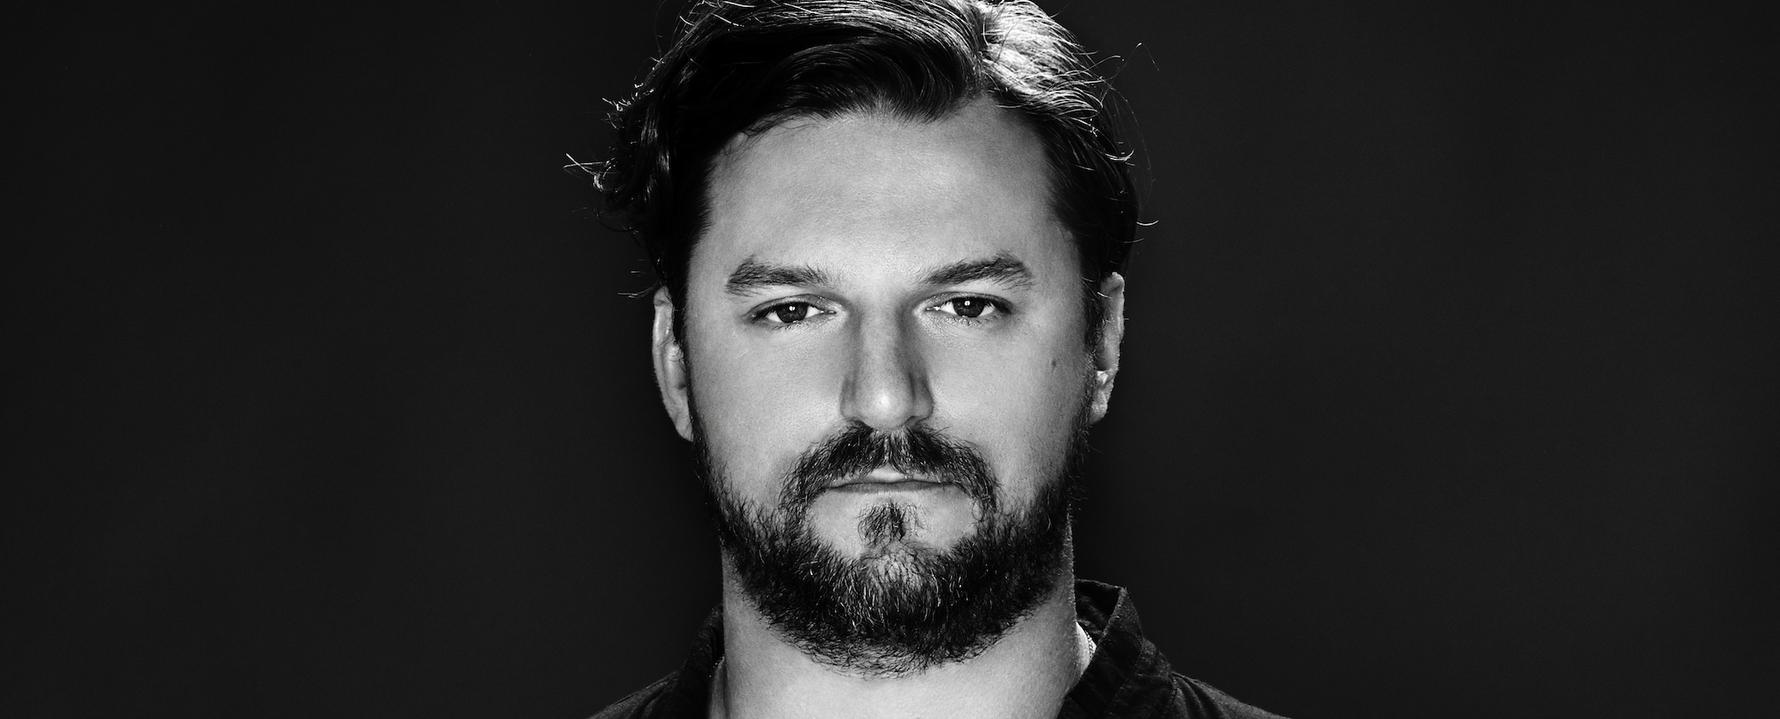 Promotional photograph of Solomun.